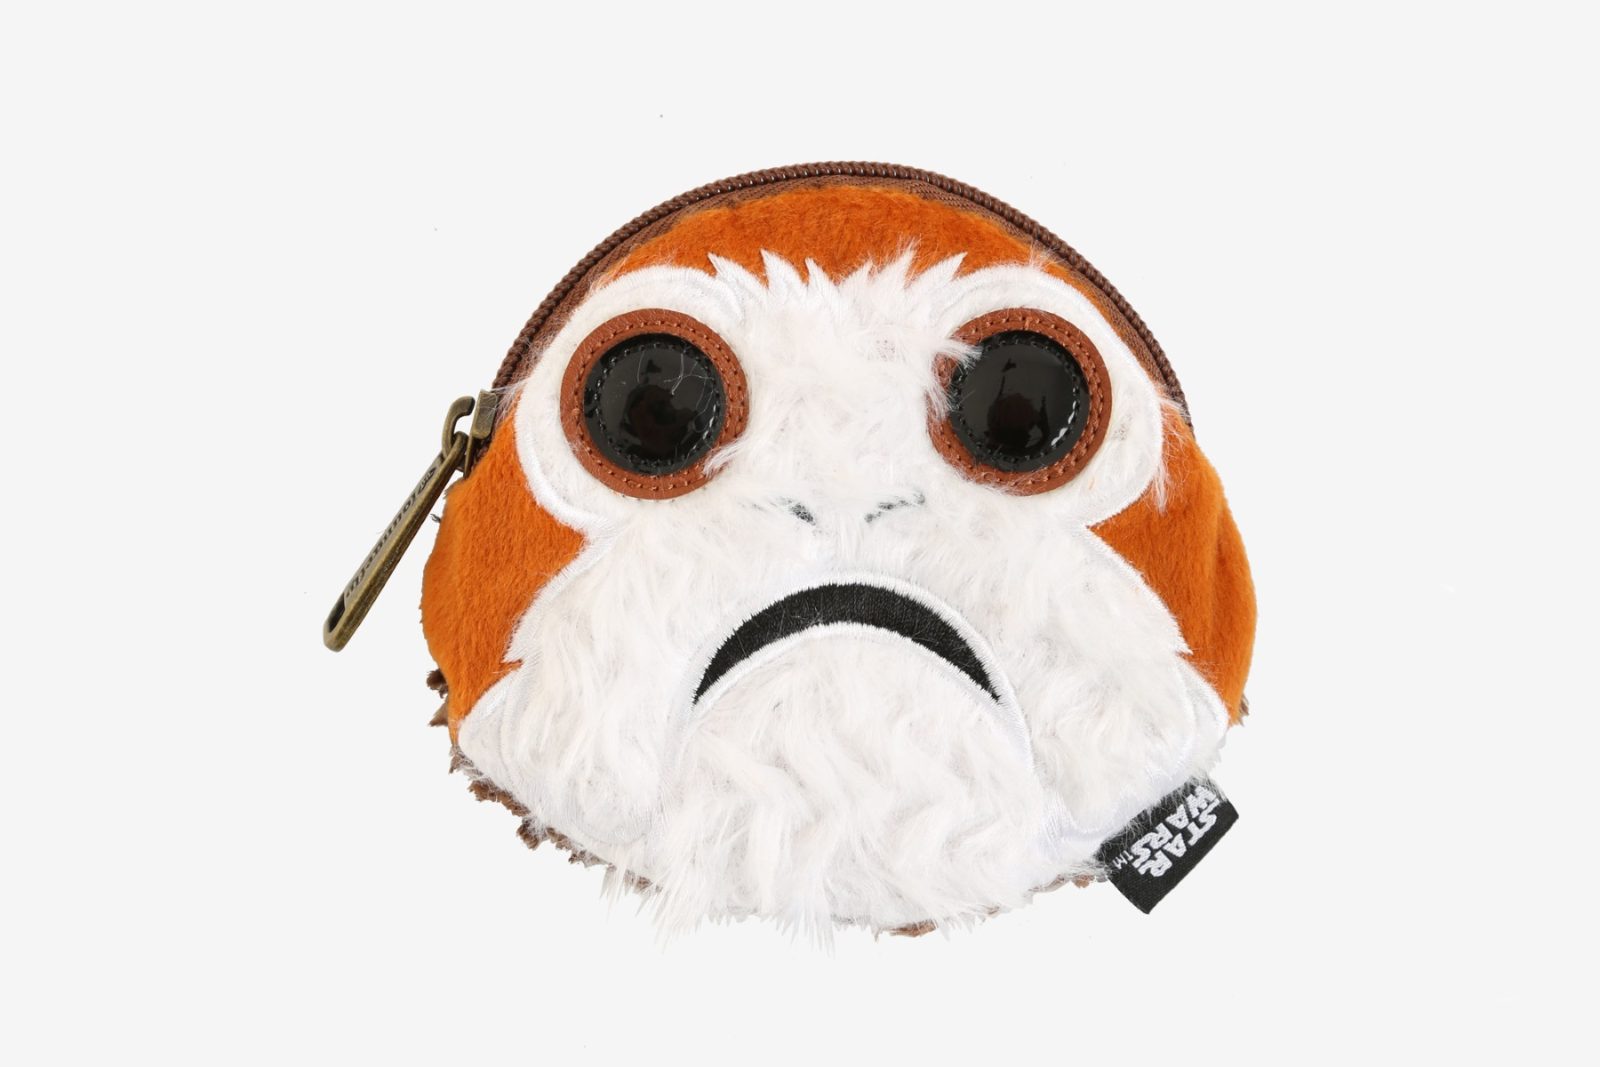 Loungefly x Star Wars The Last Jedi porg coin purse at Her Universe